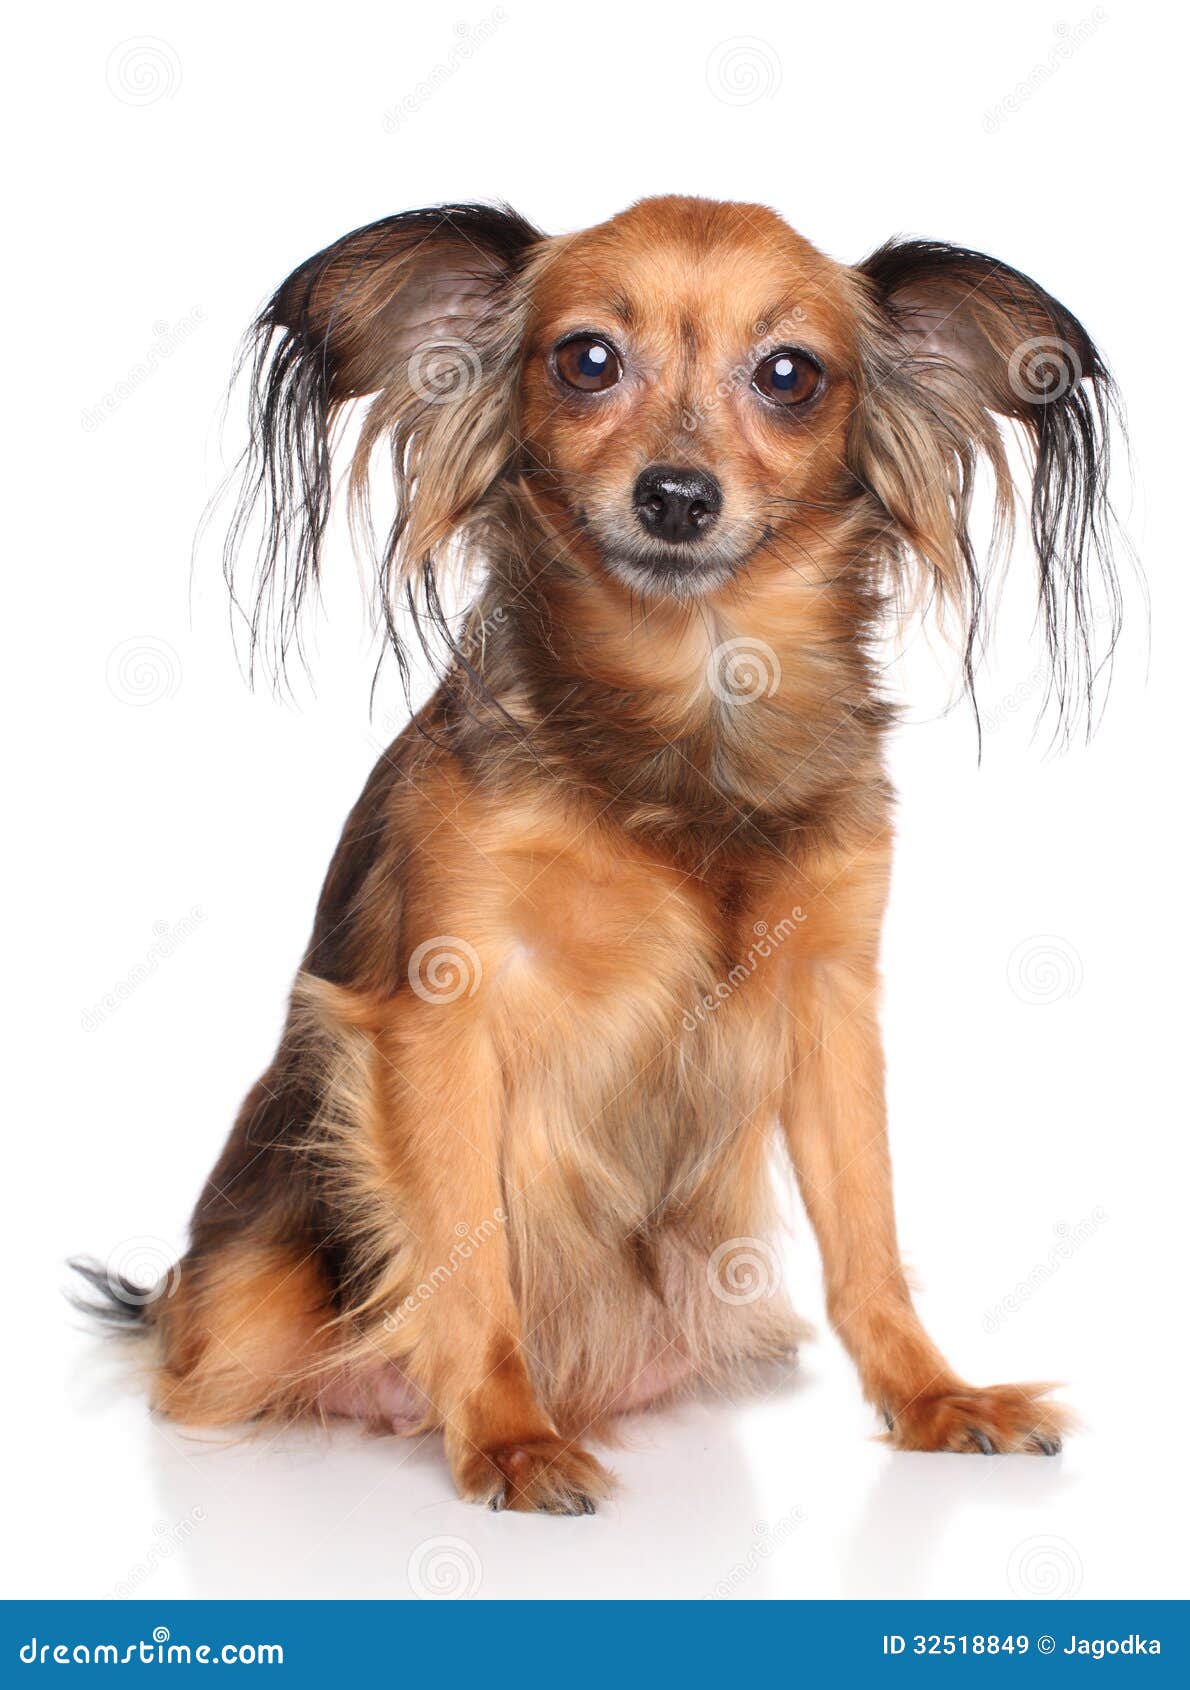 Russian Long Haired Toy Terrier Dog Stock Image Image Of Portrait Hair 32518849